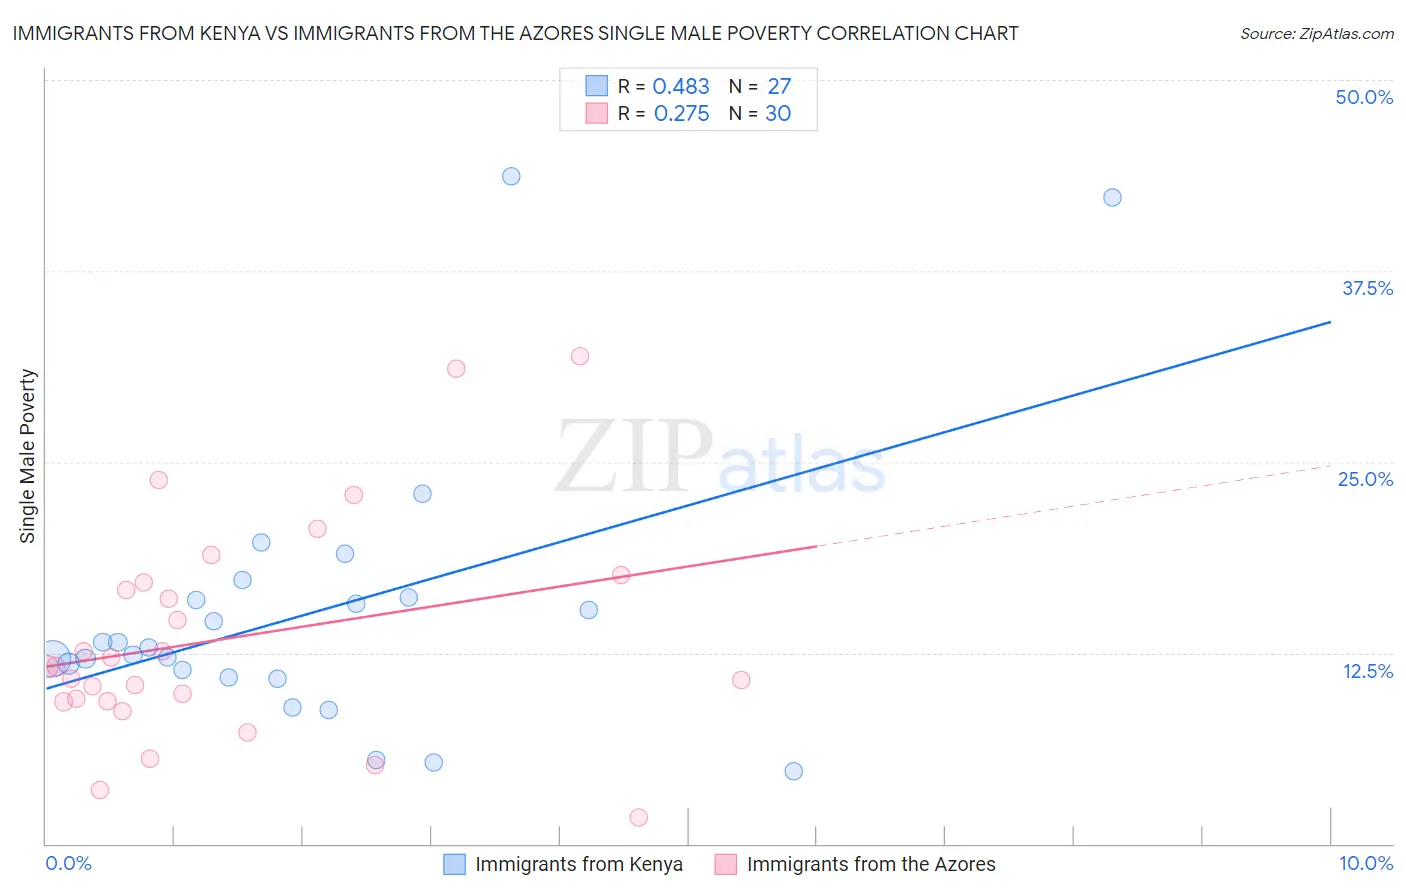 Immigrants from Kenya vs Immigrants from the Azores Single Male Poverty